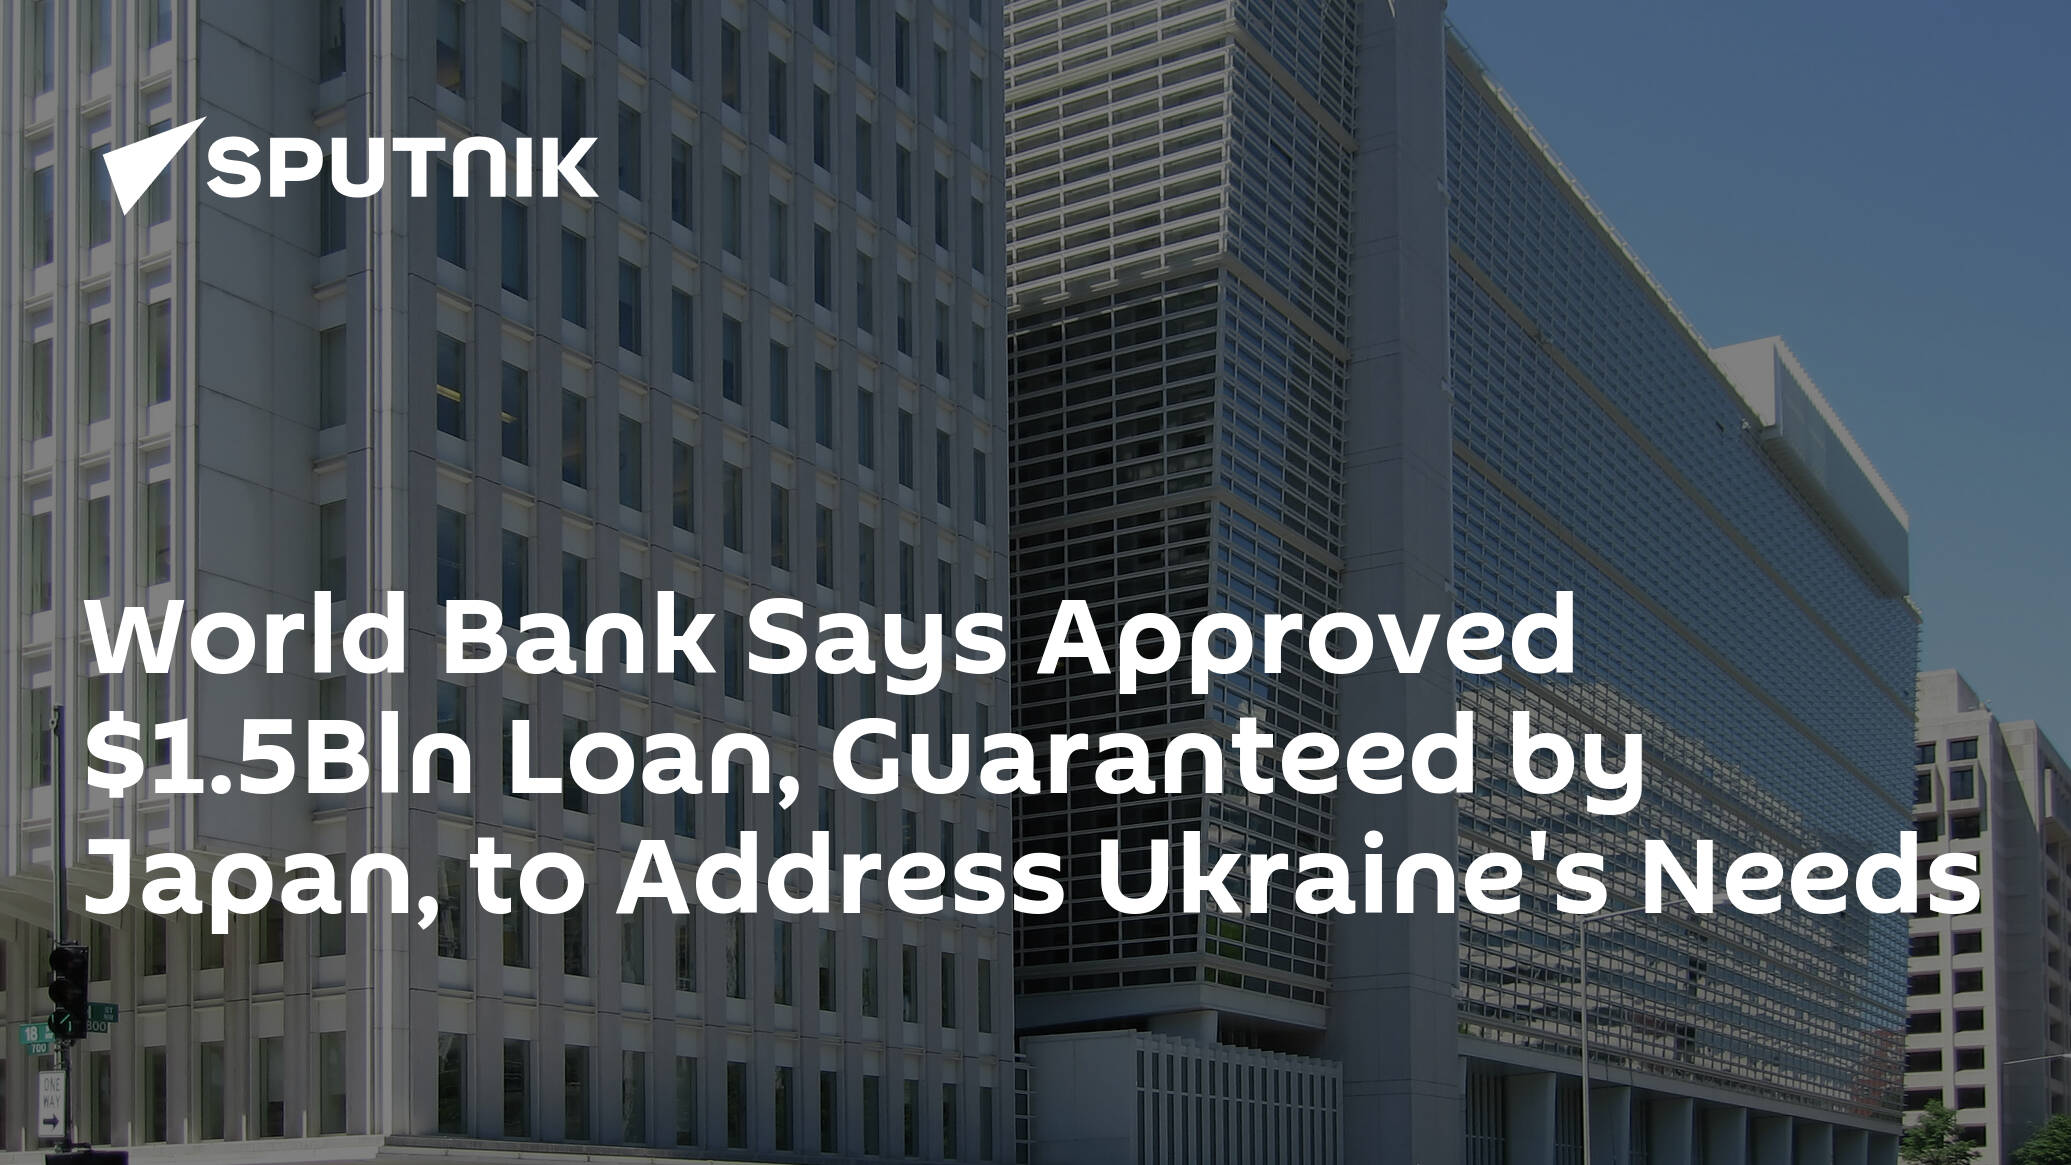 World Bank Says Approved .5Bln Loan, Guaranteed by Japan, to Address Ukraine's Needs